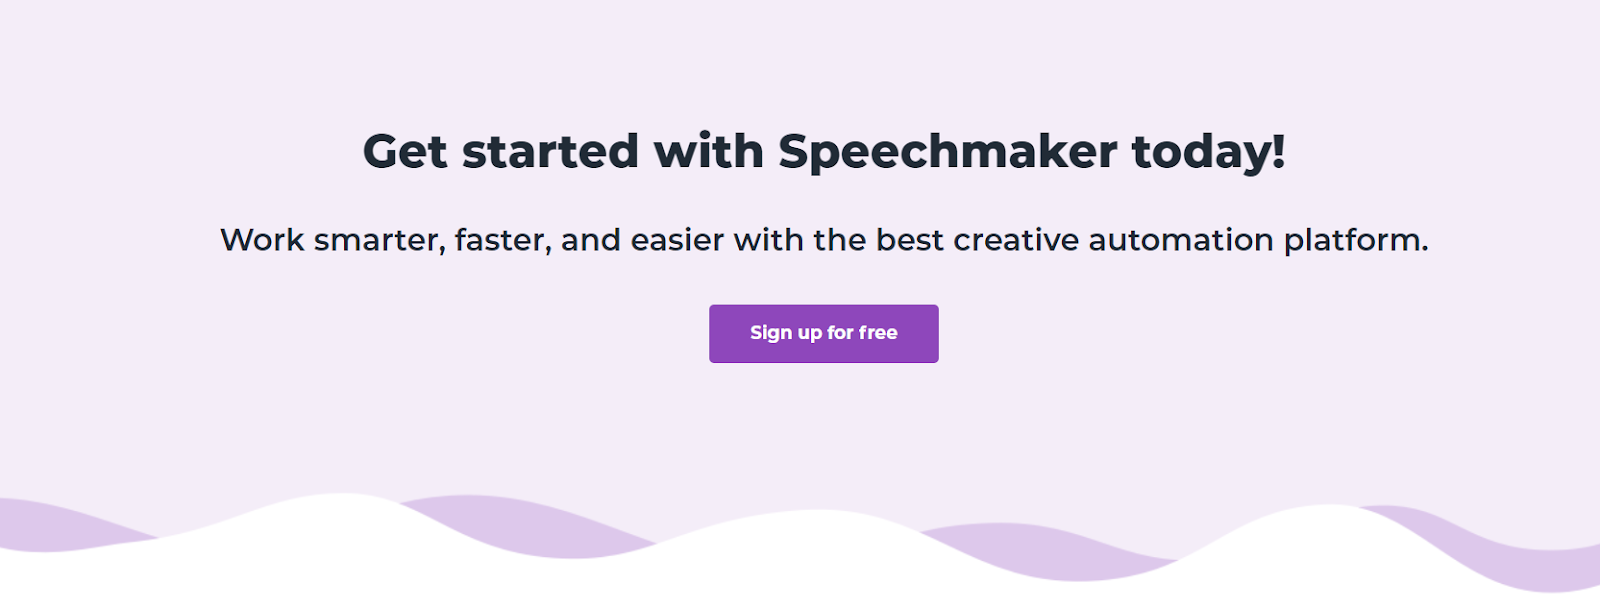 Get started with SpeechMaker today. 